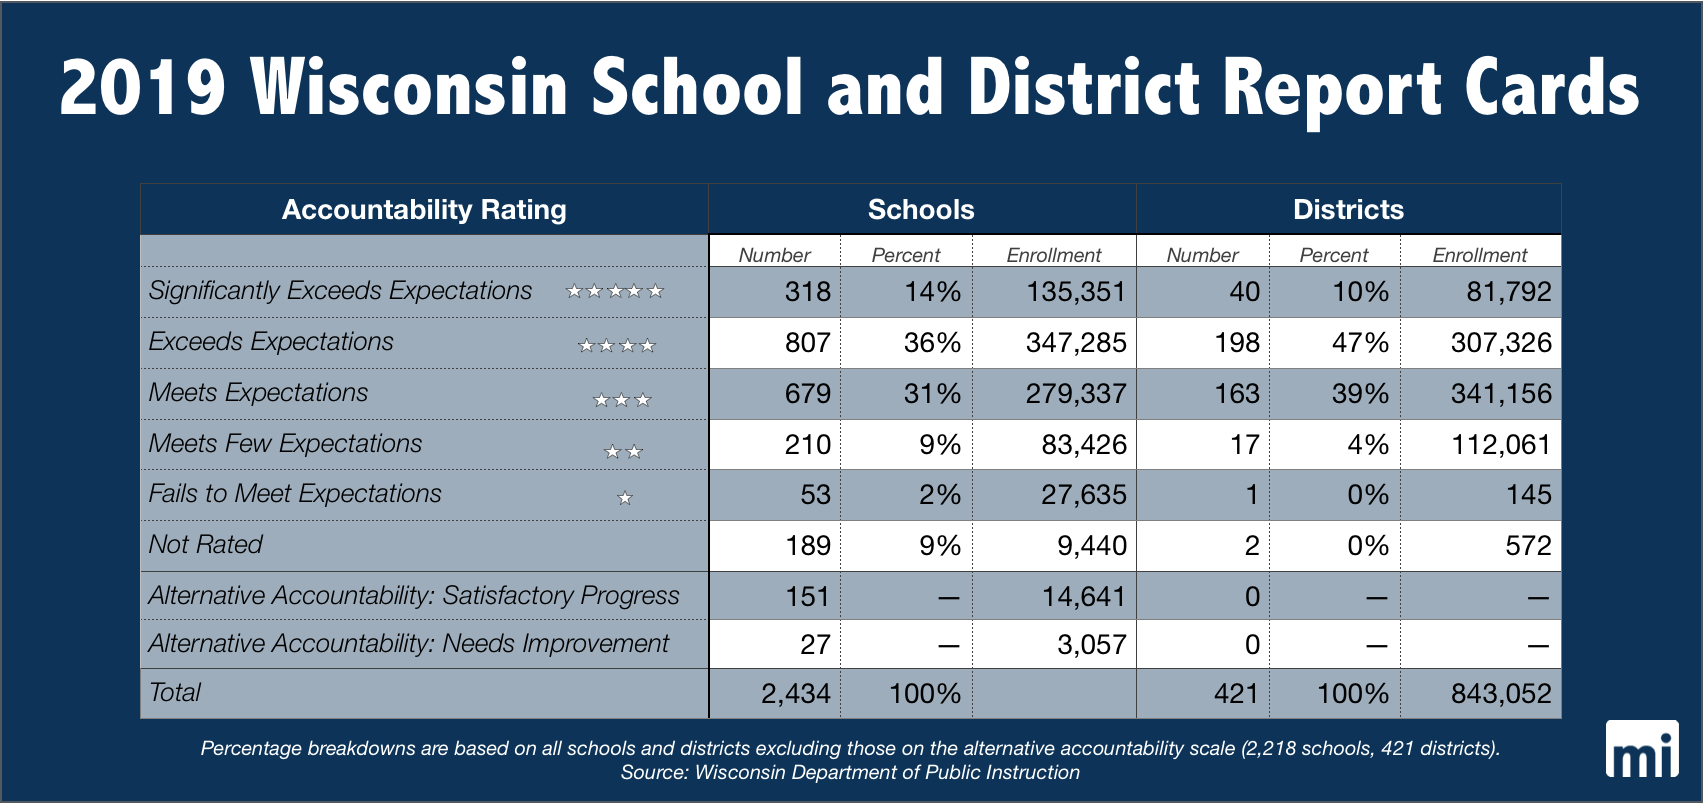 2019 Wisconsin District and School Report Cards - For the first time sine 2017, a district has been marked “failing.” Yet compared to last year, the number of failing schools fell by nearly half